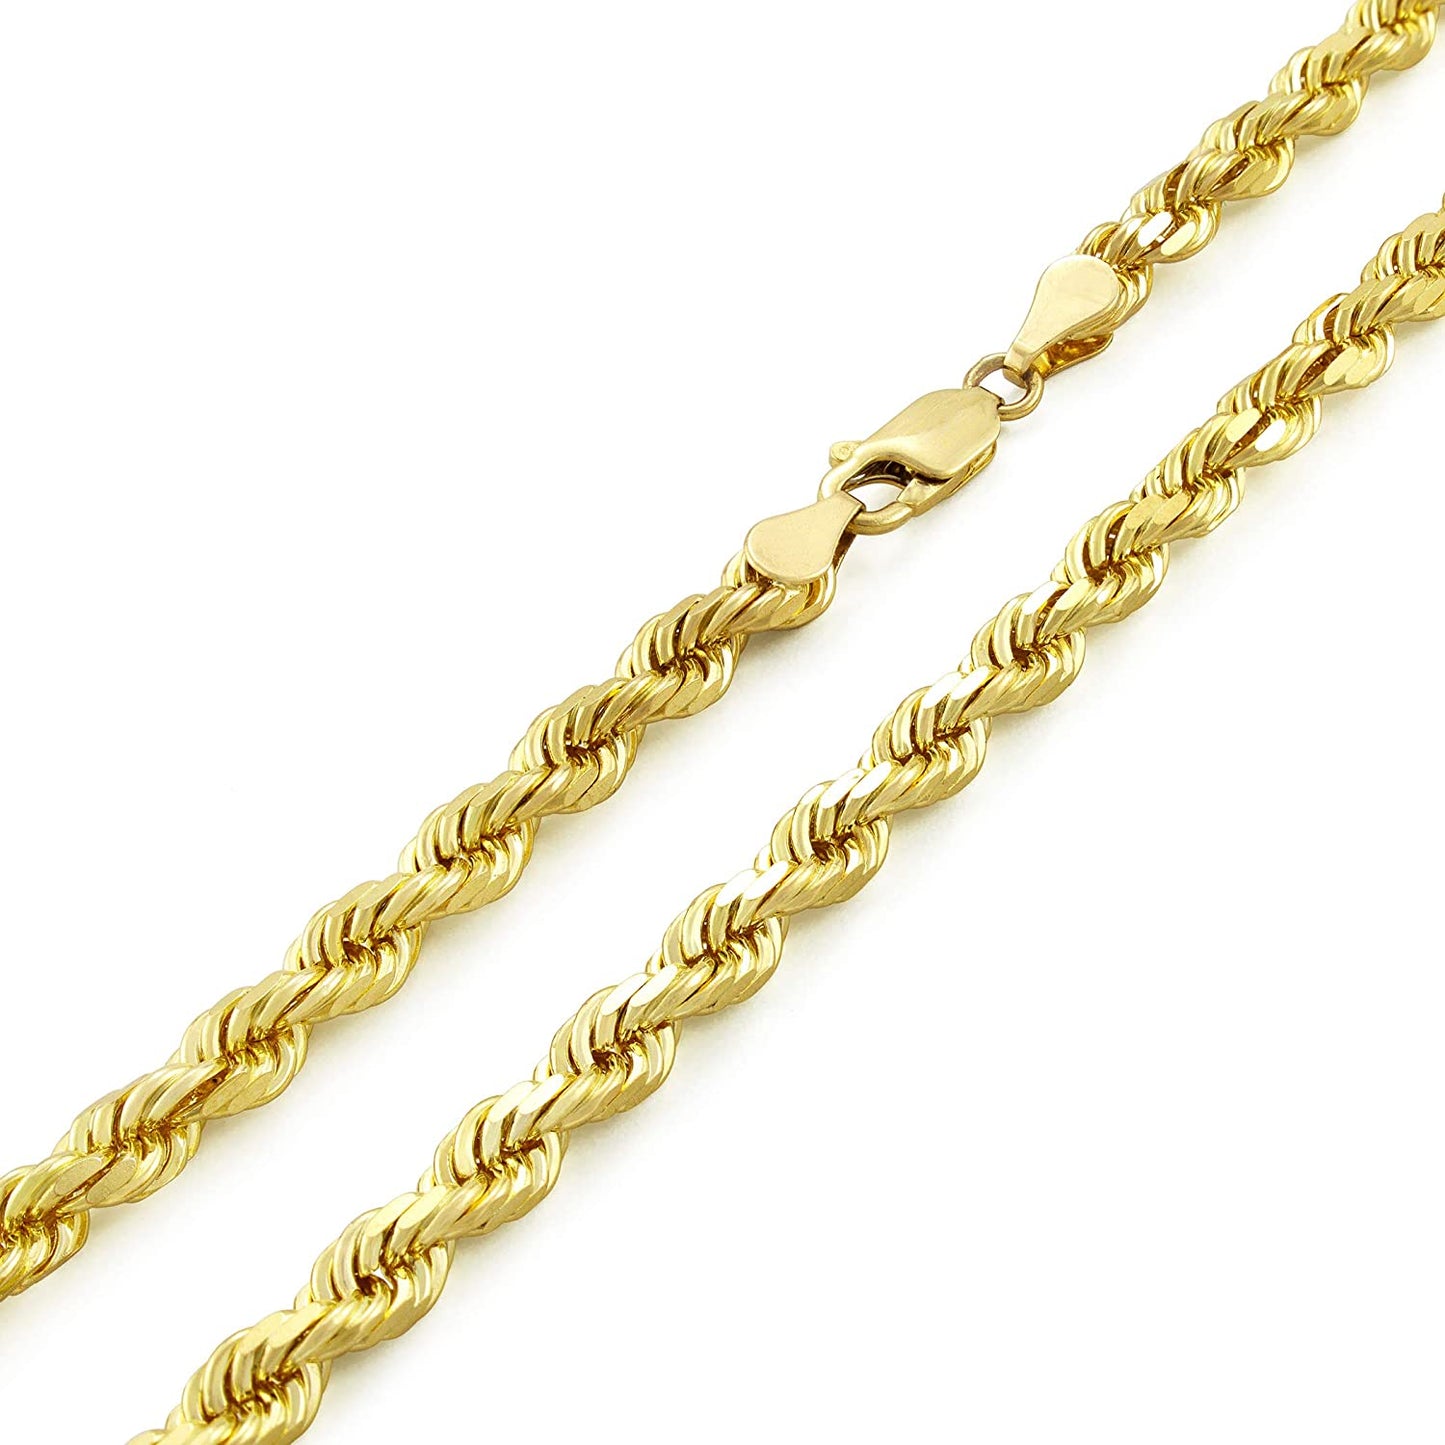 Better Jewelry 3.2mm Rope Diamond cut Chain Necklace .925 Sterling Silver Gold Plated